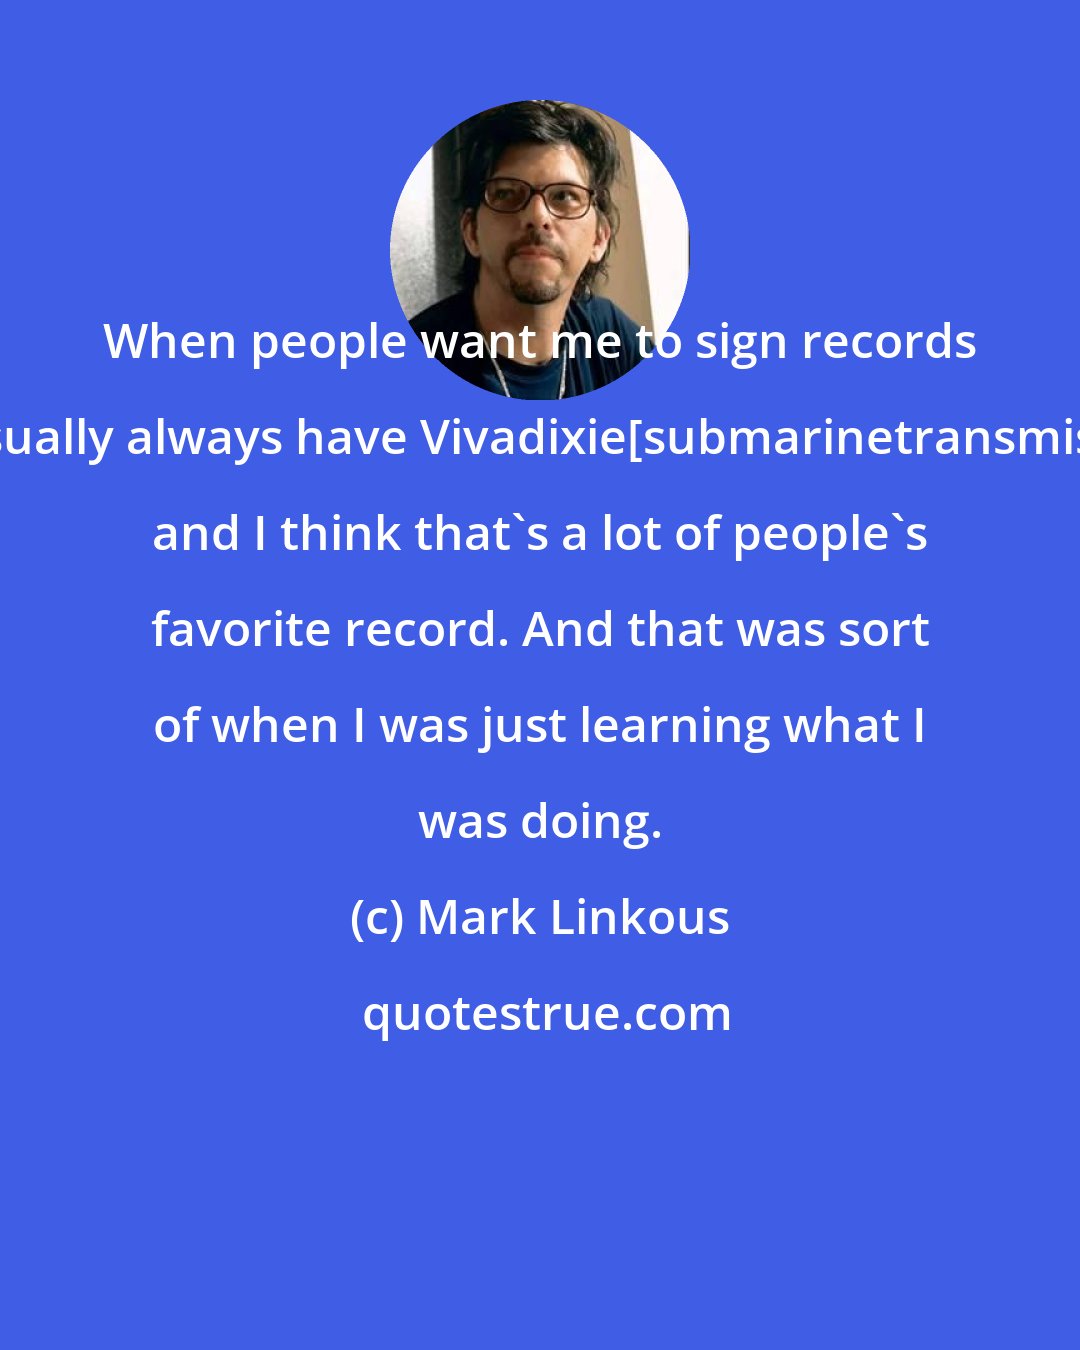 Mark Linkous: When people want me to sign records they usually always have Vivadixie[submarinetransmissions], and I think that's a lot of people's favorite record. And that was sort of when I was just learning what I was doing.